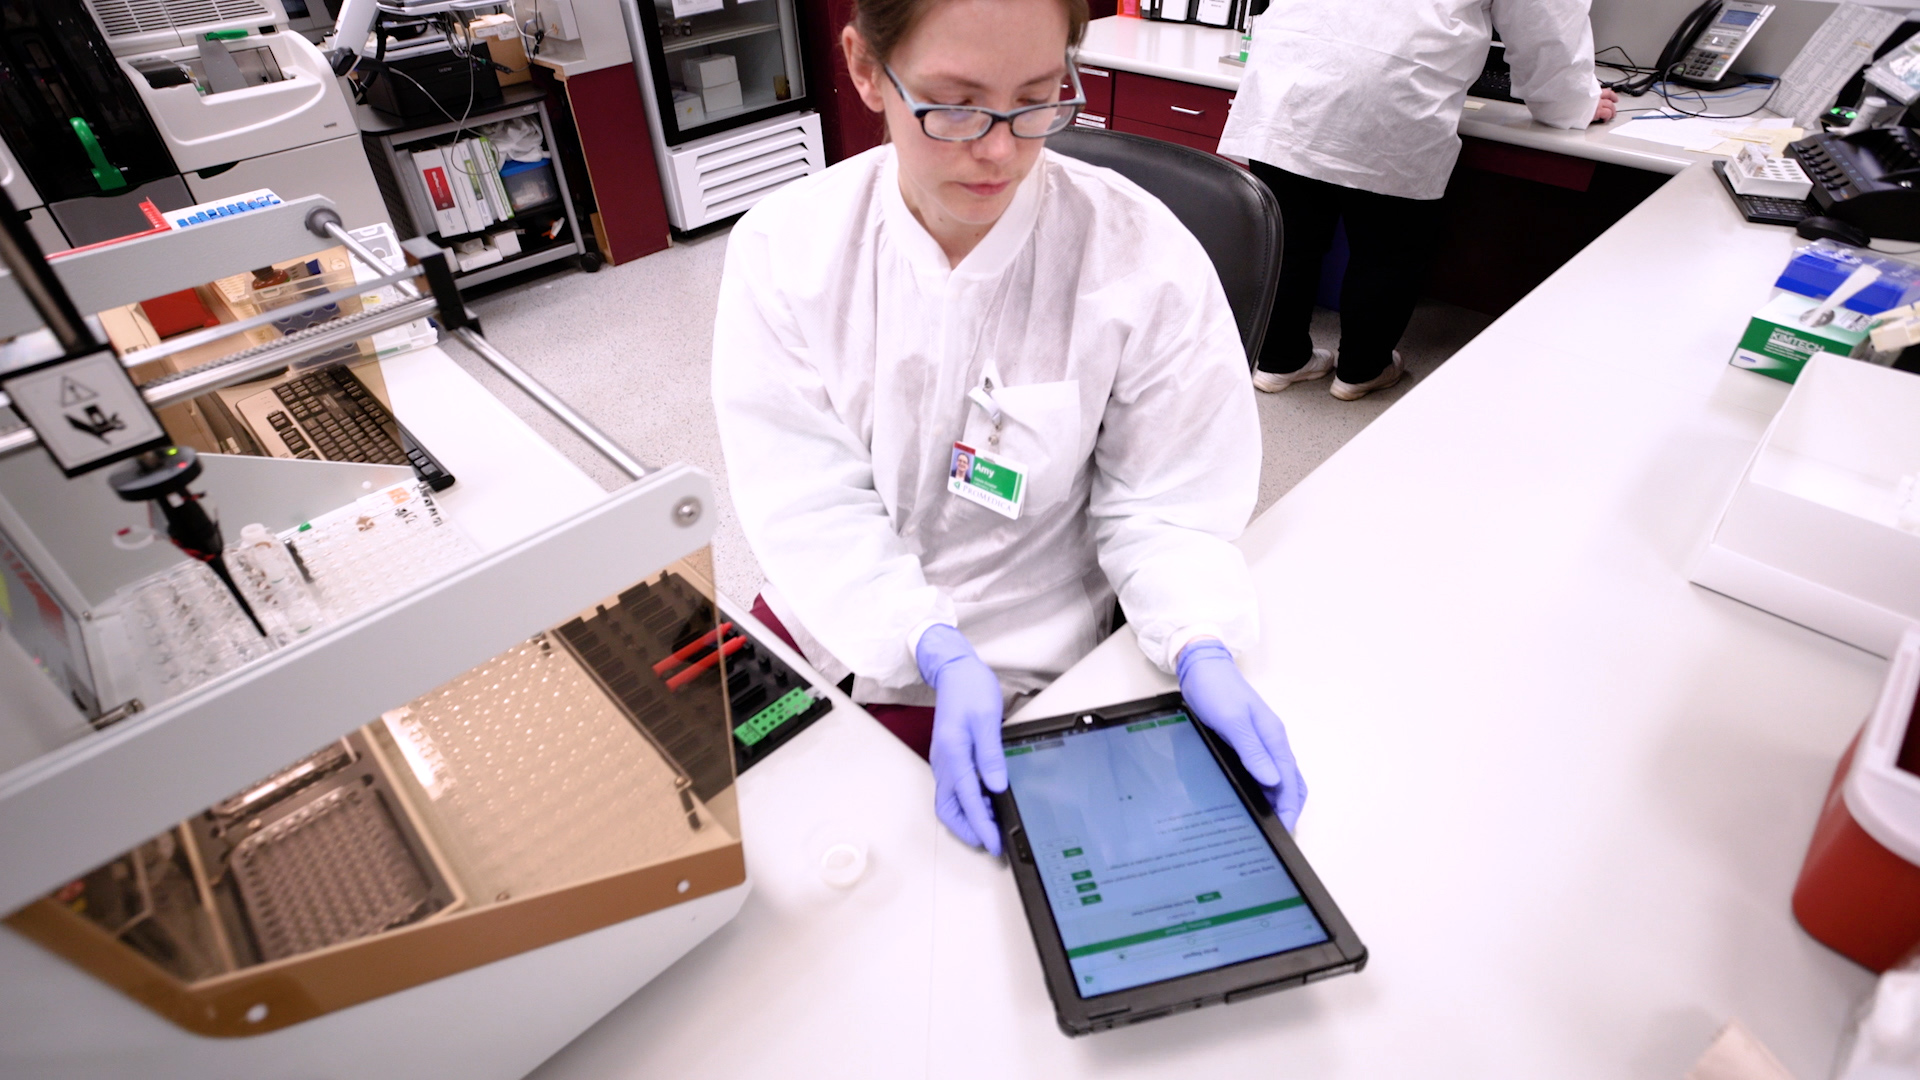 A ProMedica Laboratories employee uses the Assured Compliance Solution (ACS) on the Universal Windows Platform (UWP) via her Windows 10 device. 